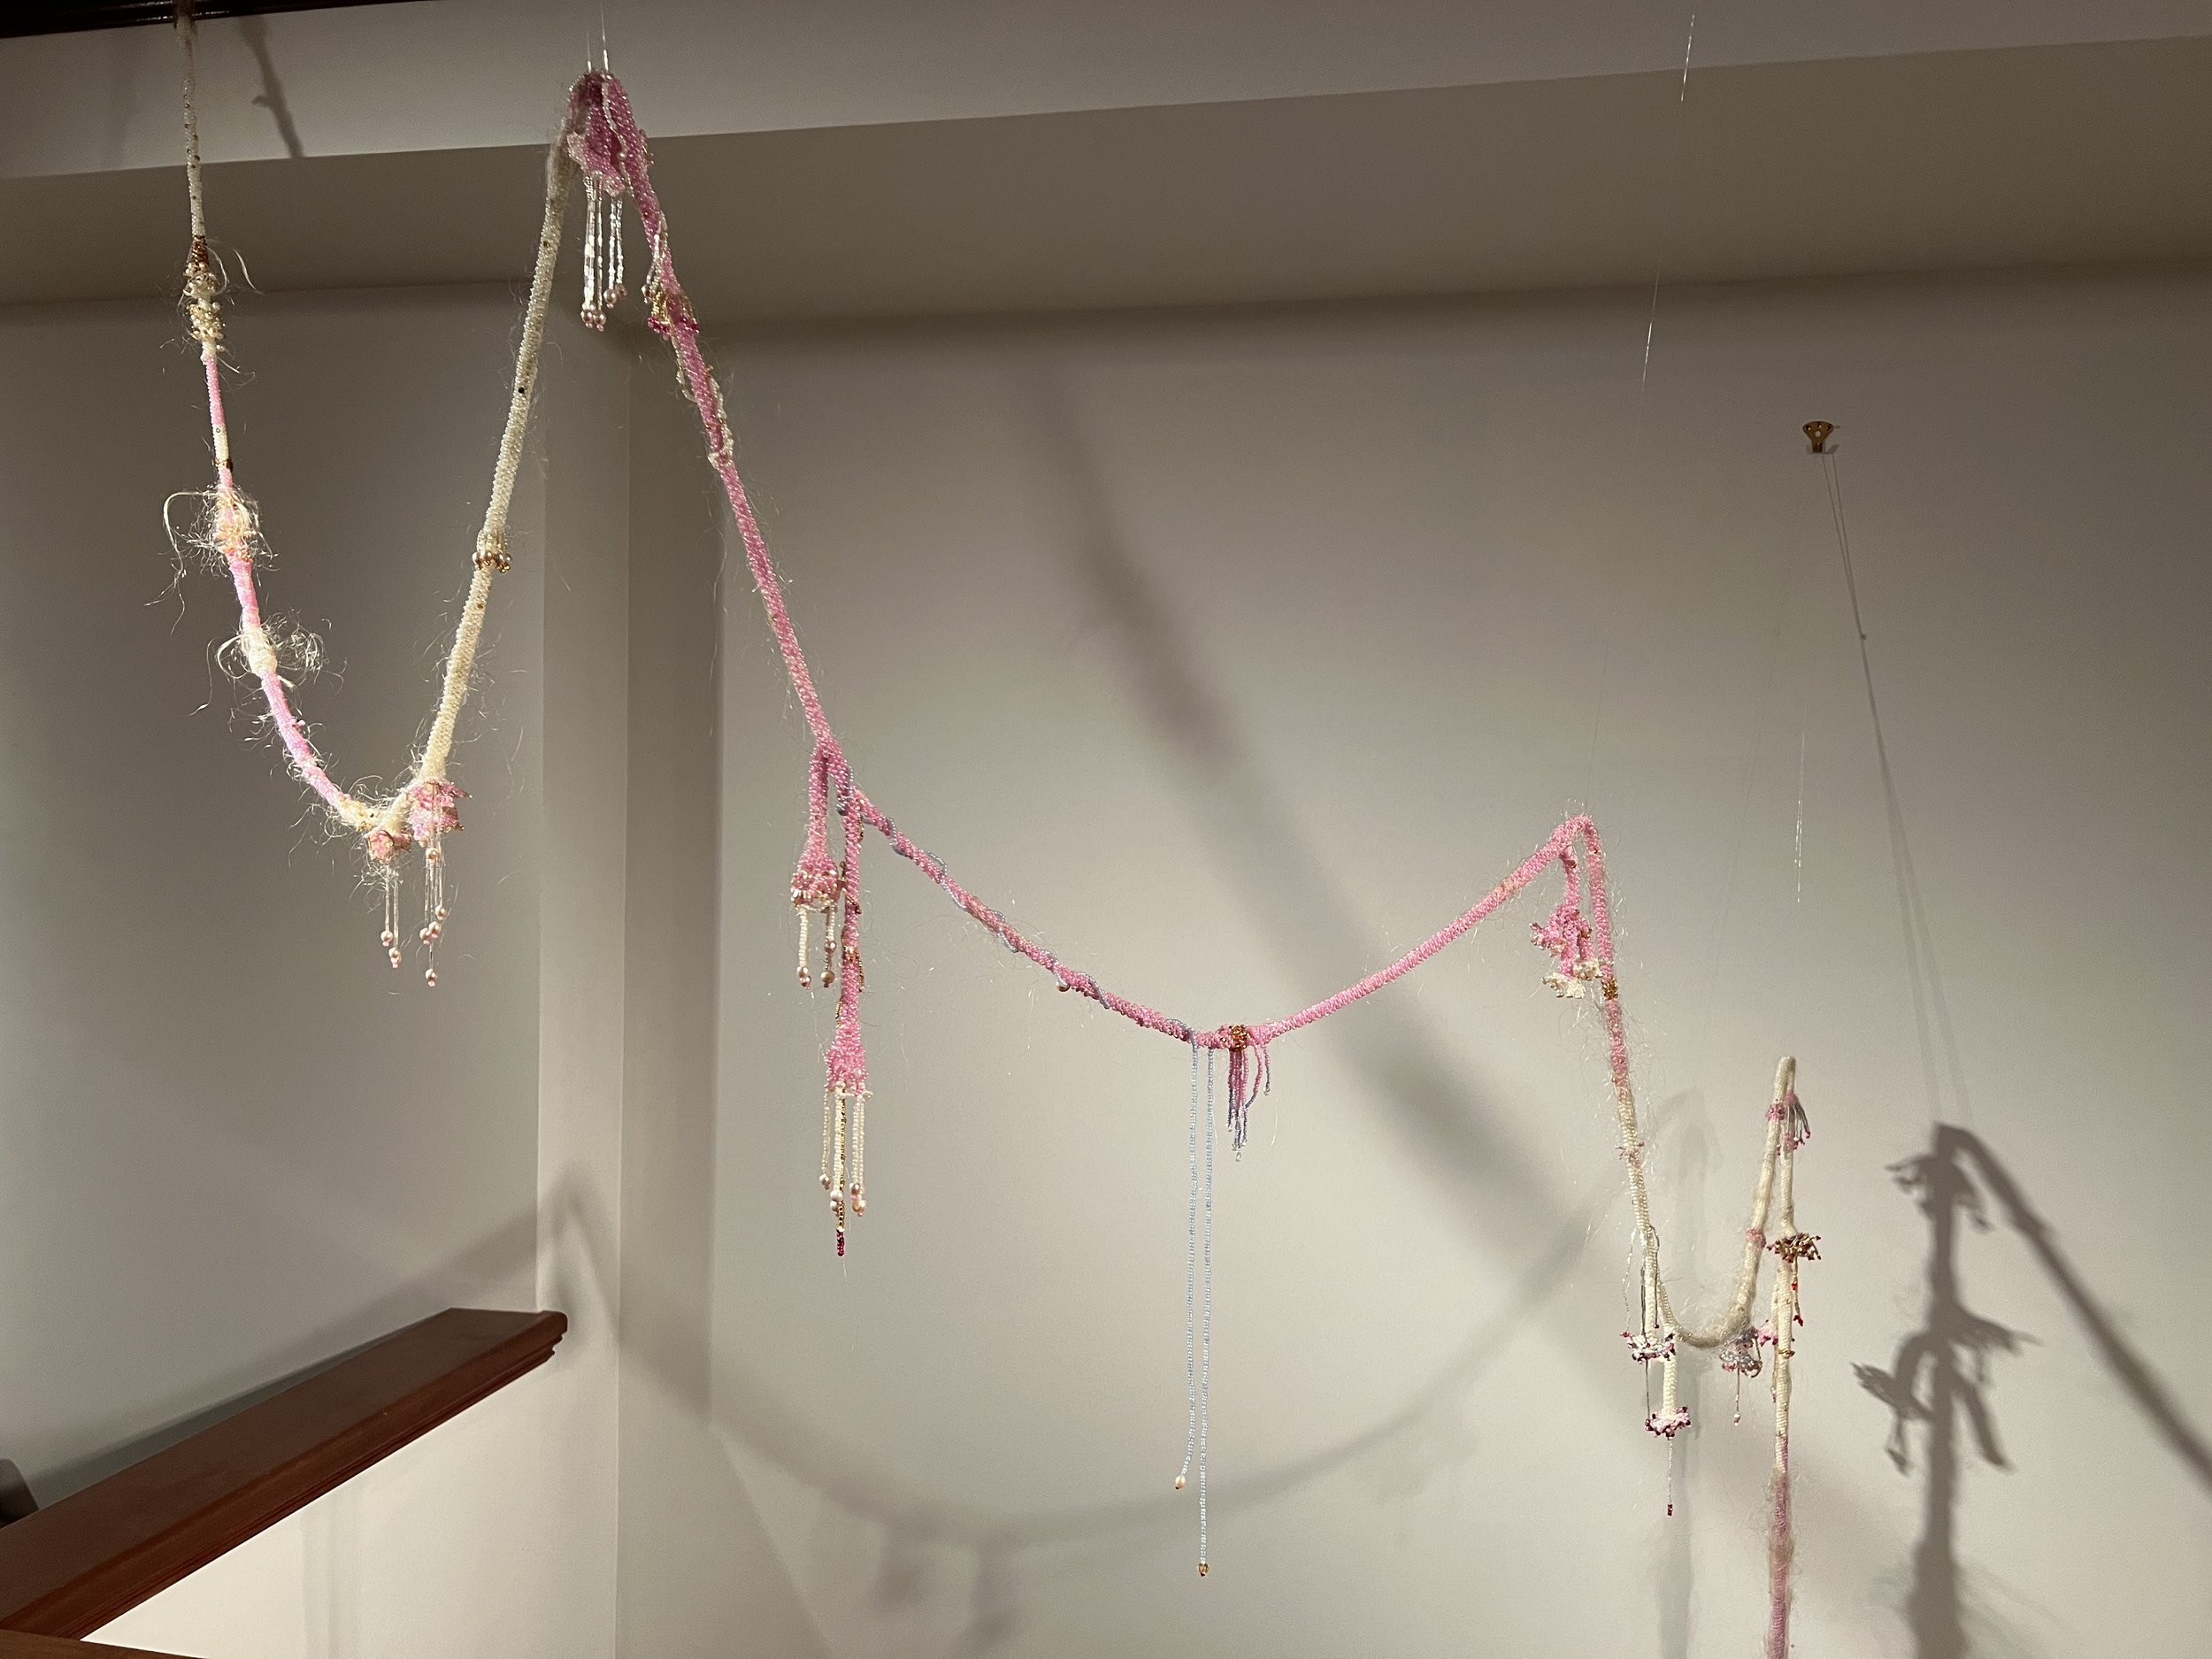 Installation of a pink and white bead and hairwork piece.